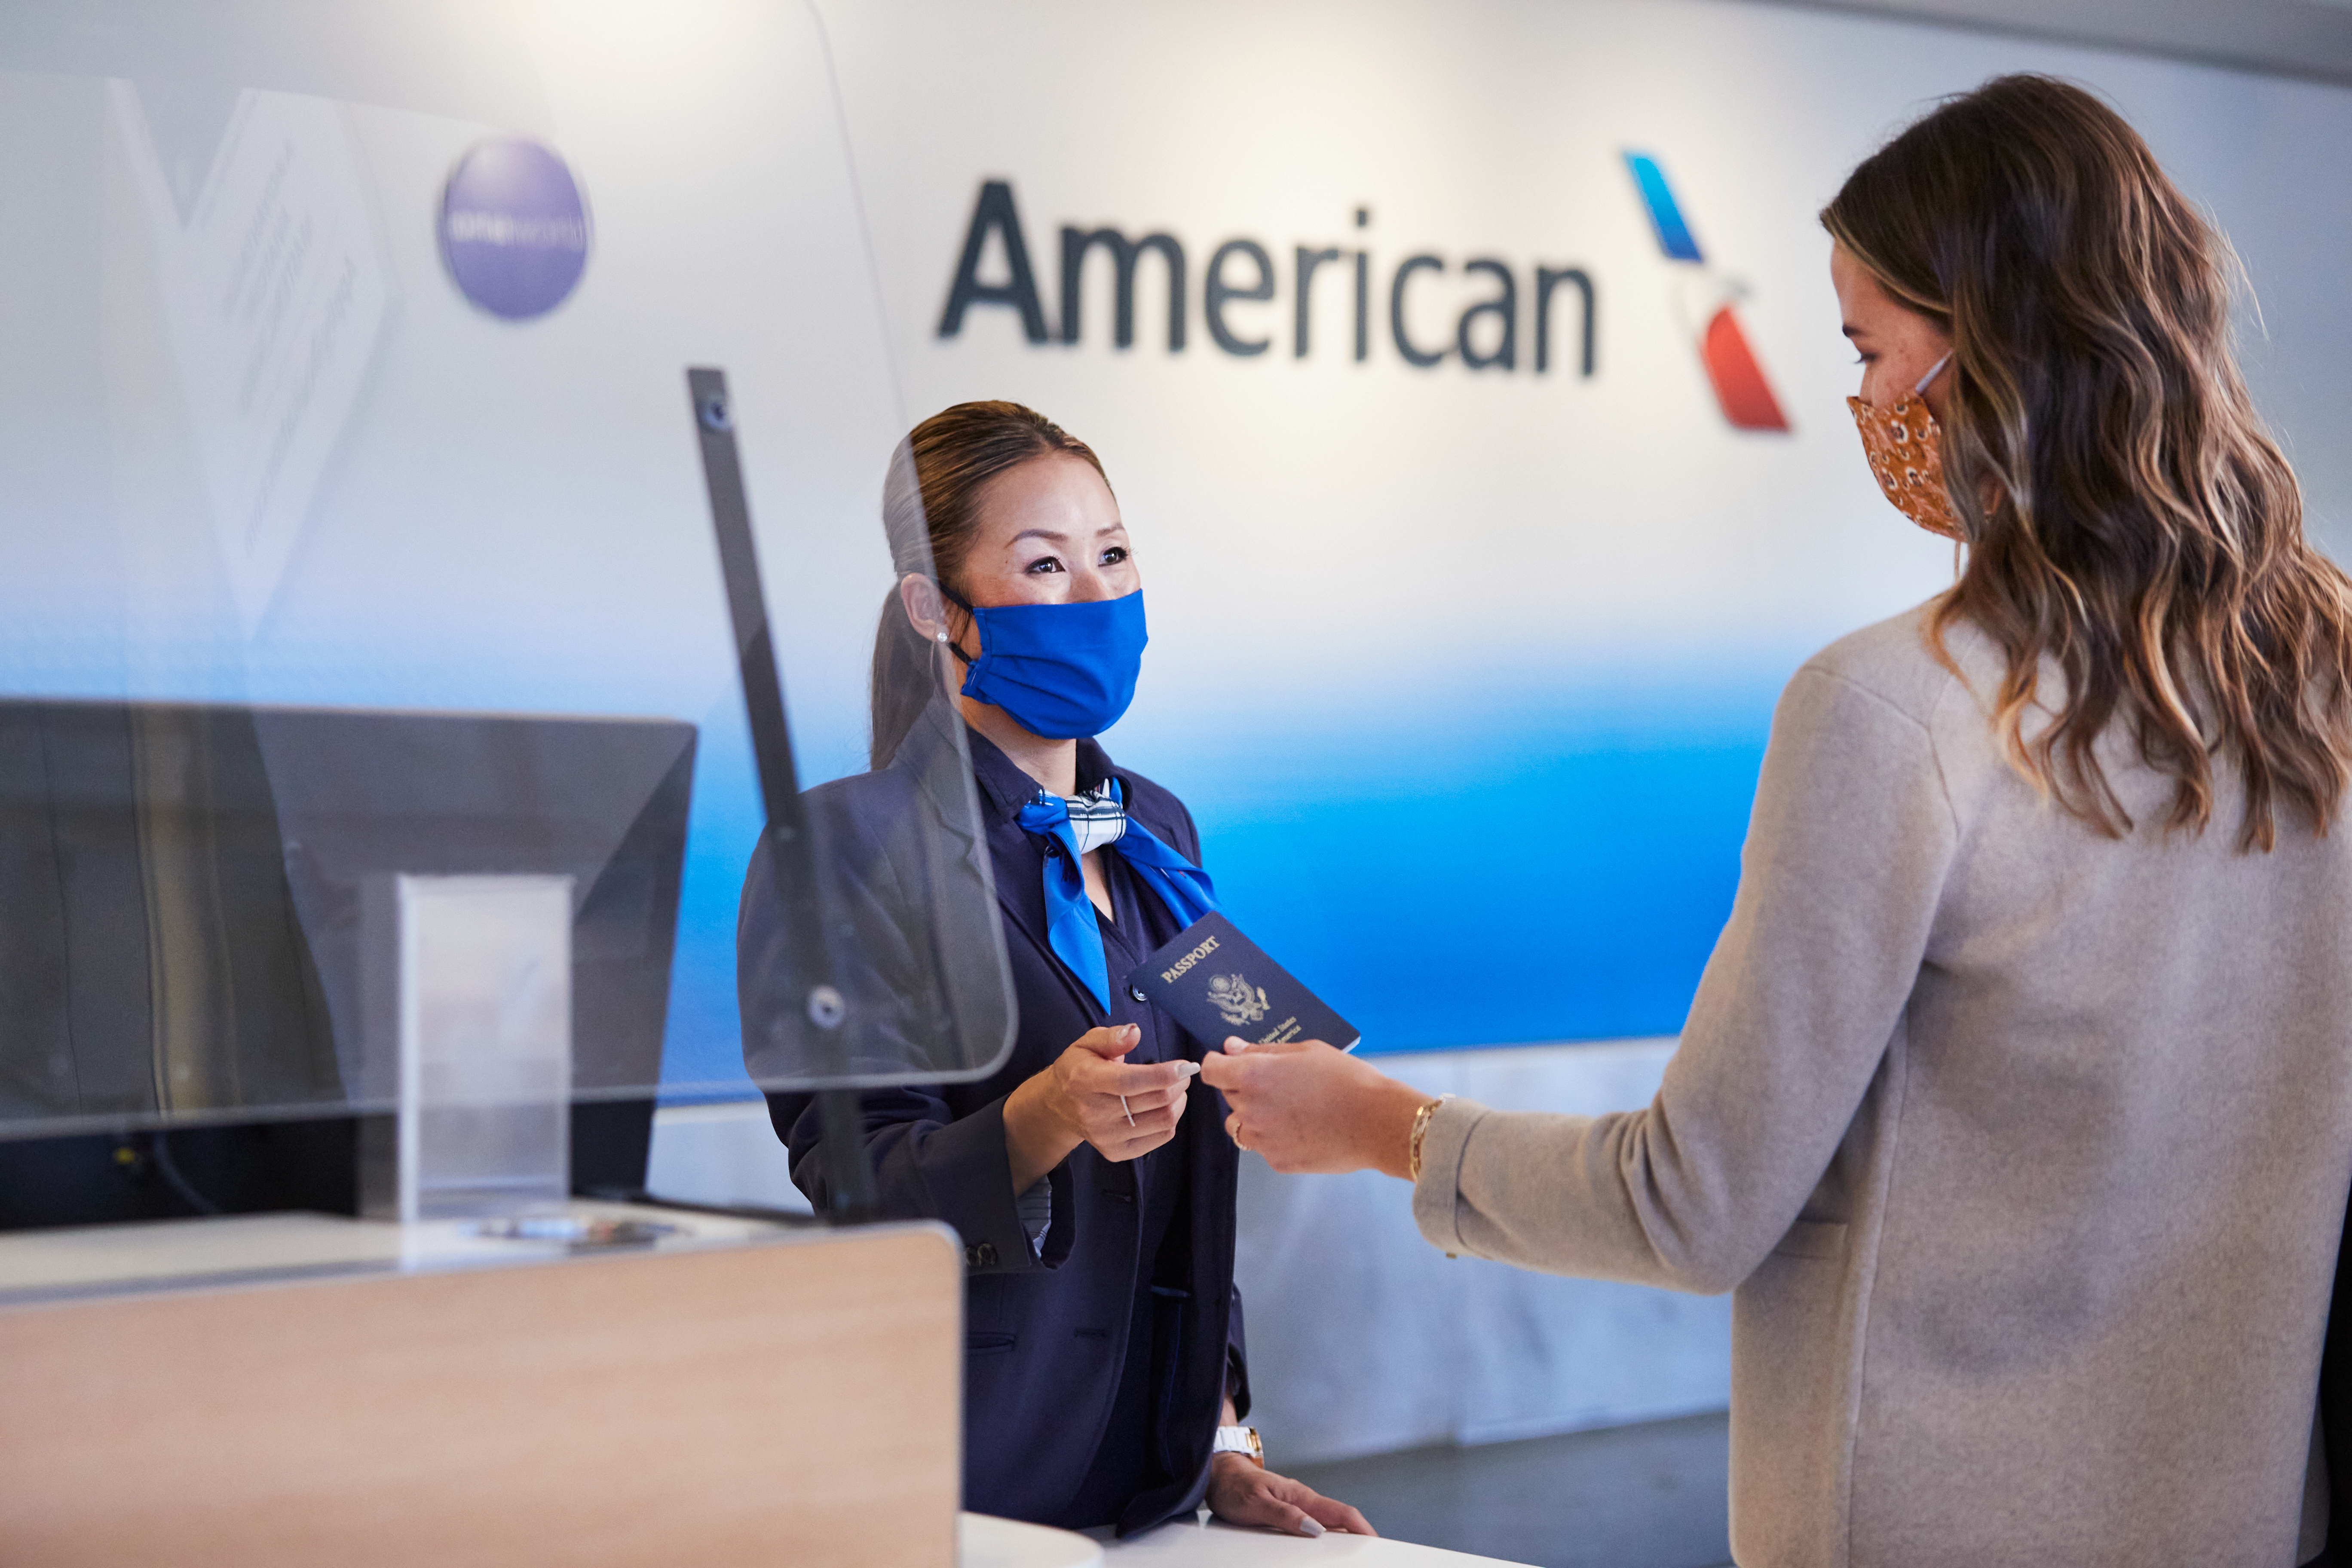 American Airlines AAdvantage: What to Know - NerdWallet